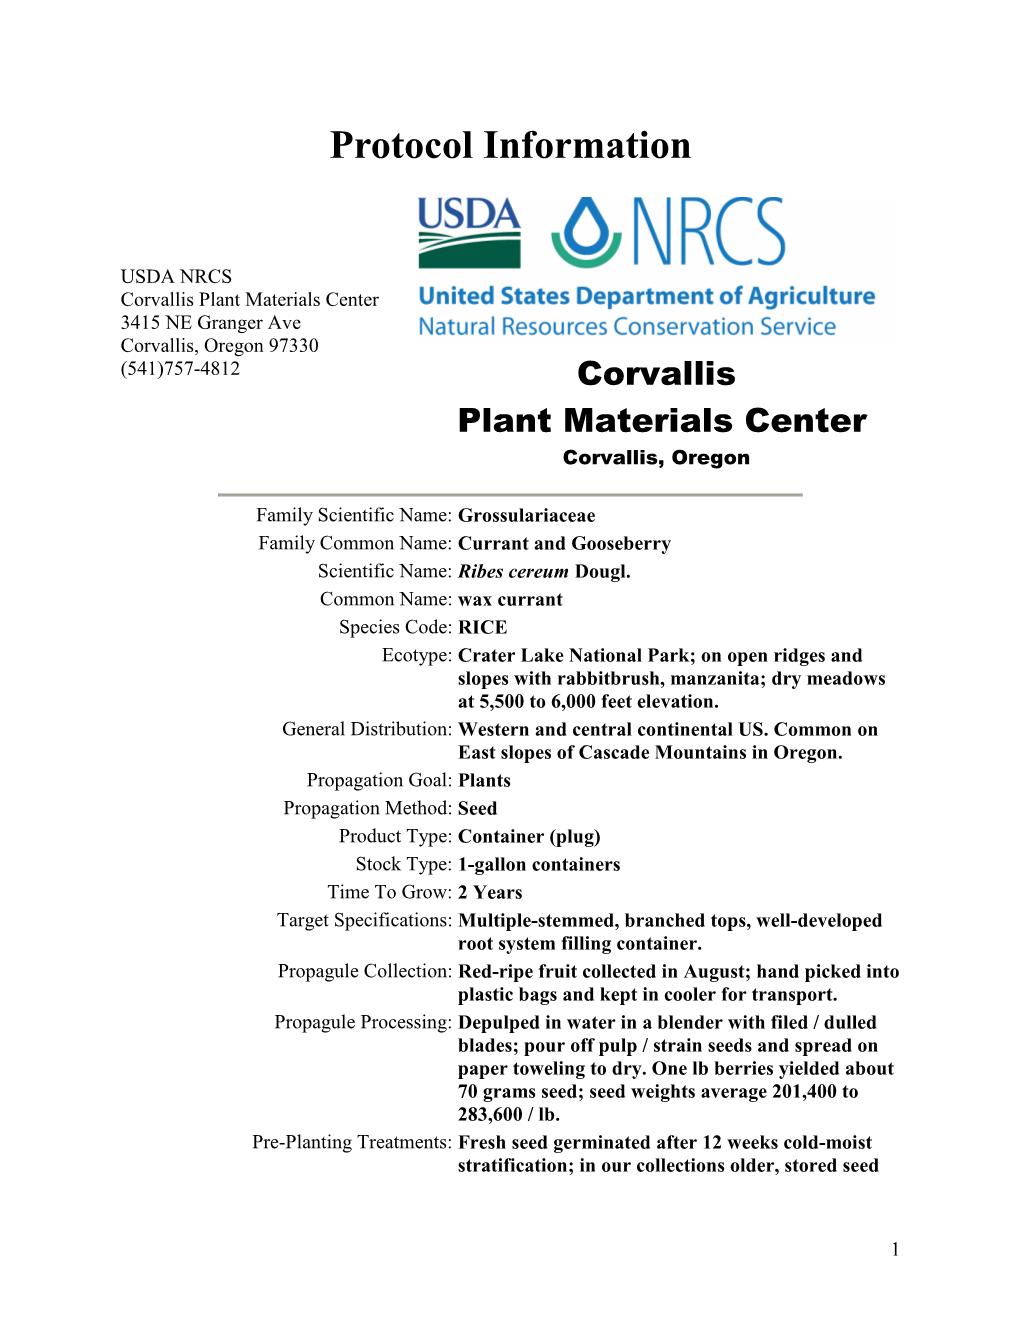 Propagation Protocol for Production of Container Ribes Cereum Dougl